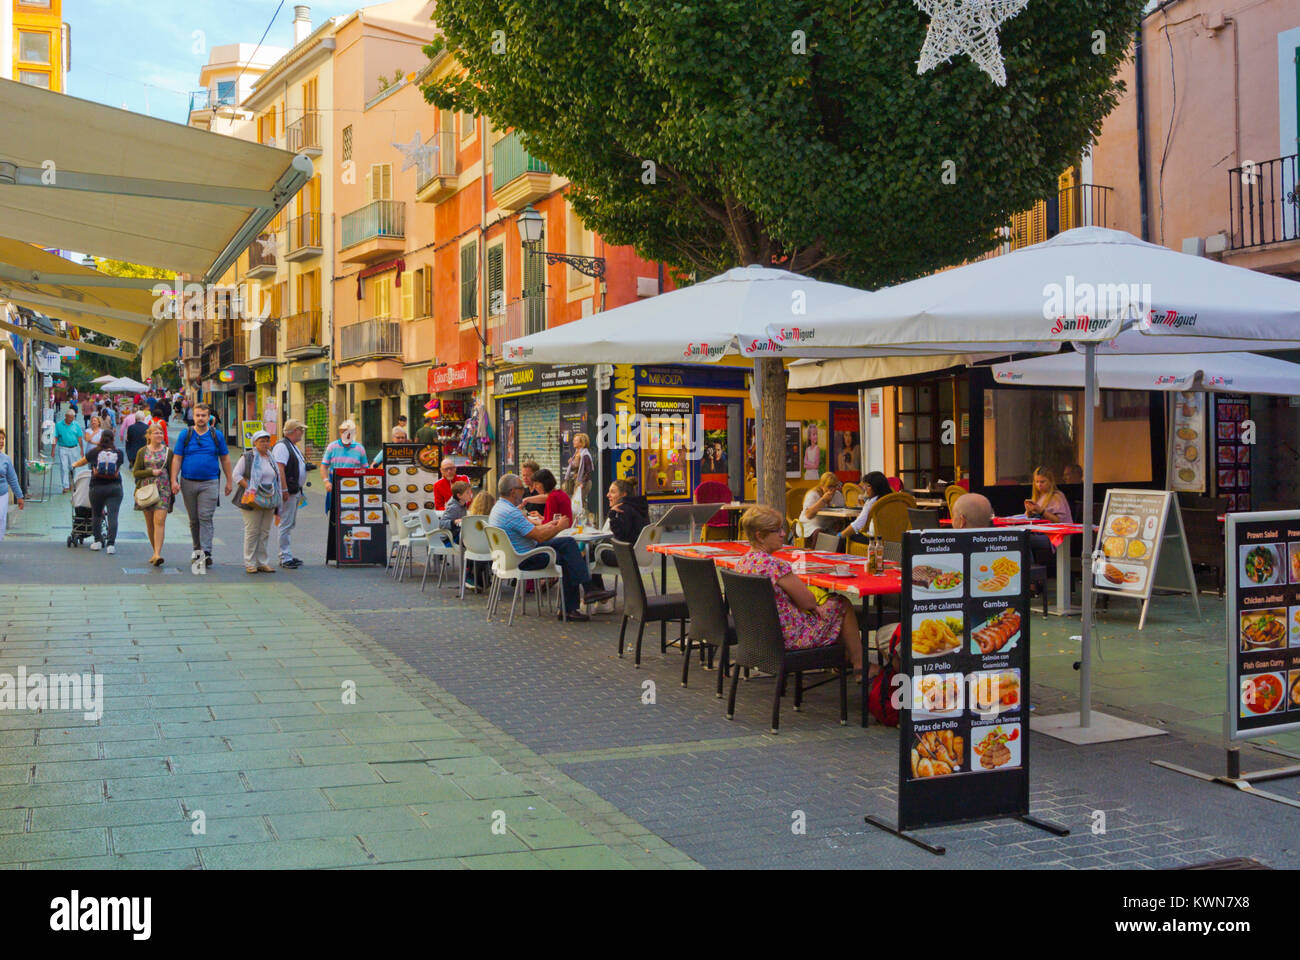 Carrer dels Oms, old town, Palma, Mallorca, Balearic islands, Spain Stock Photo